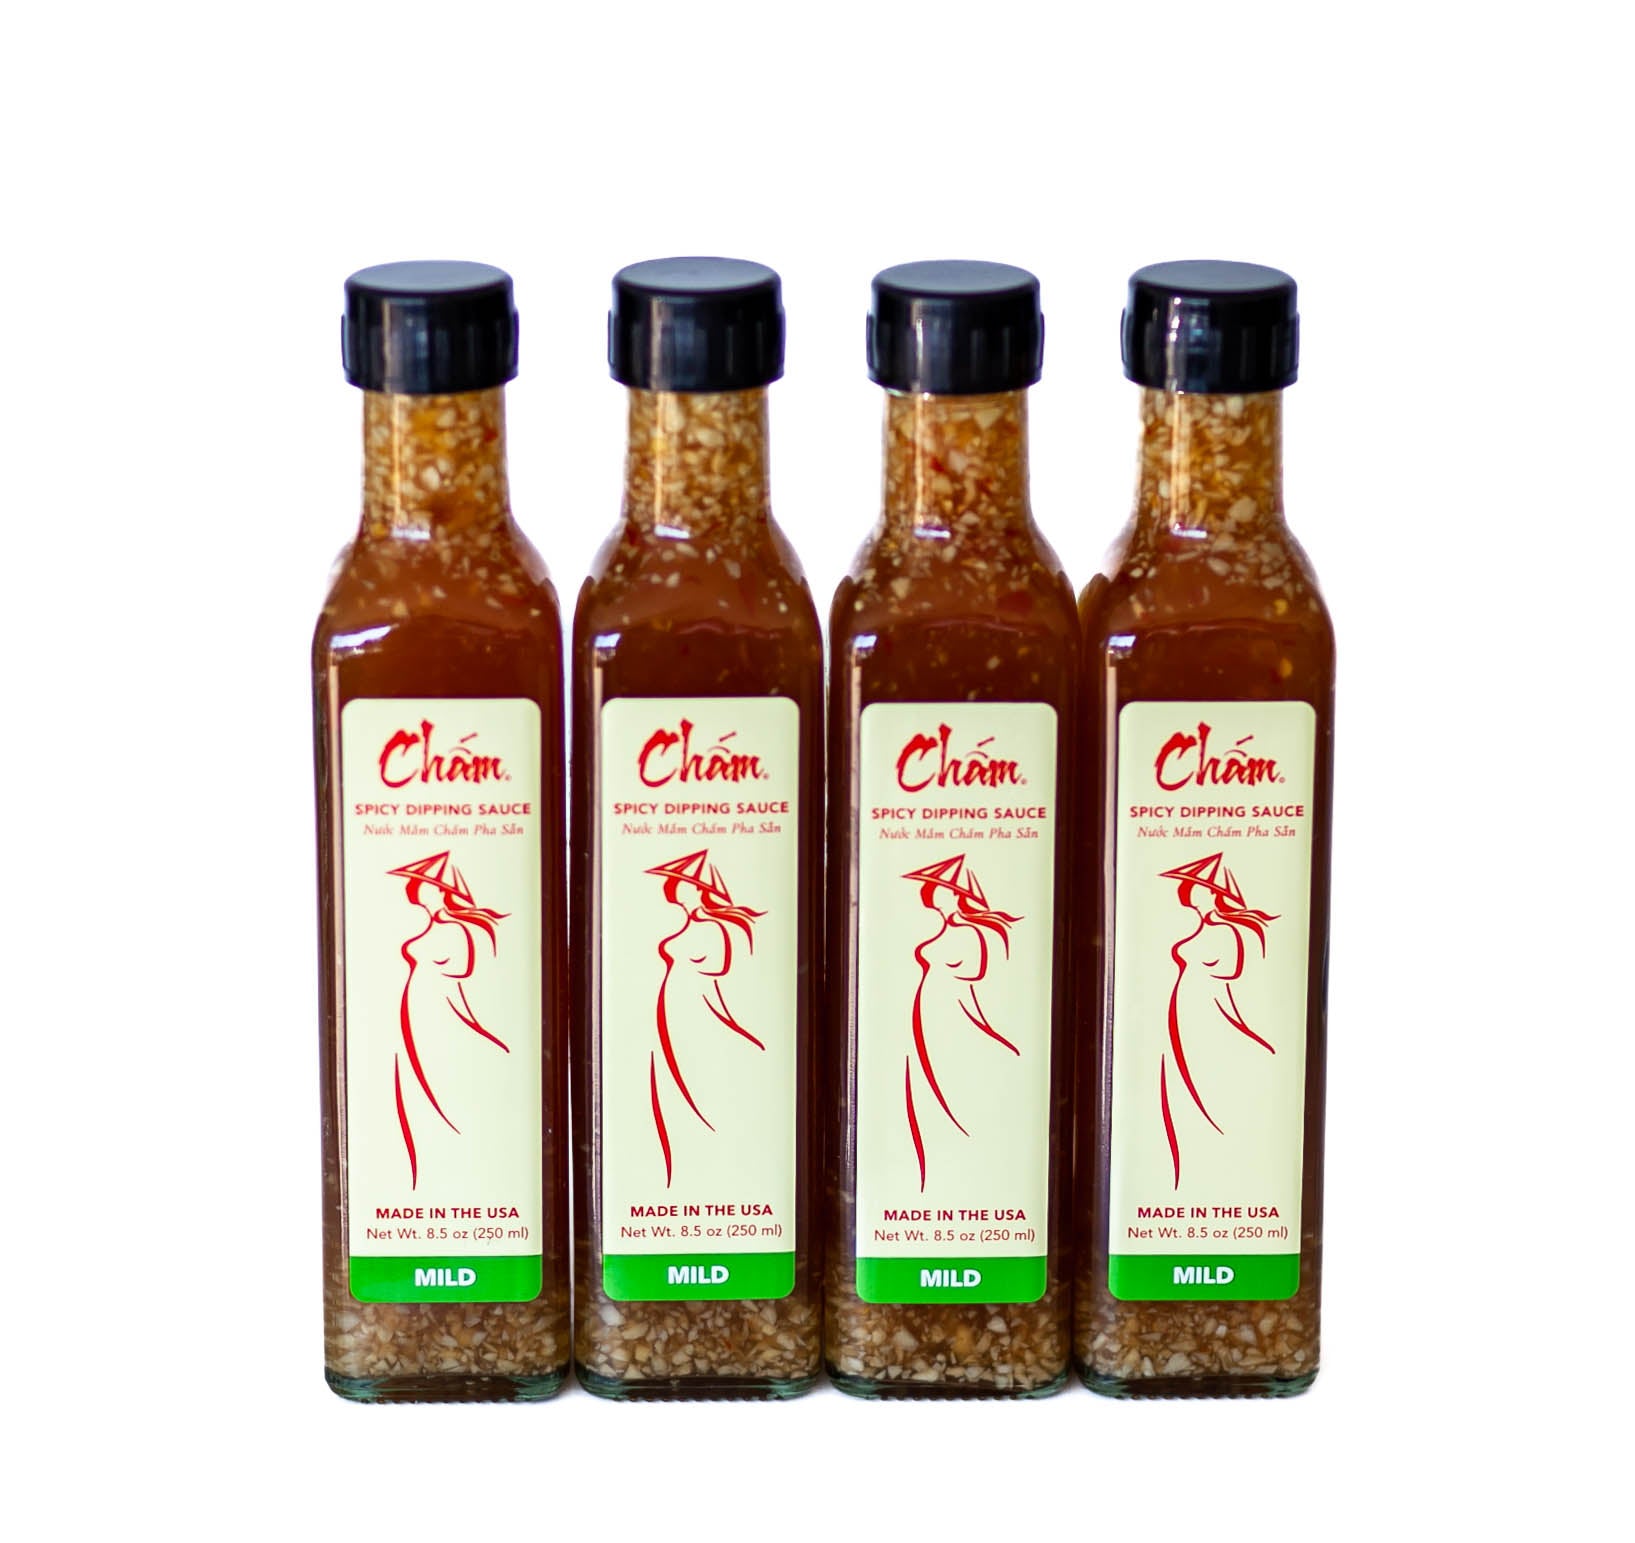 Cham Spicy Dipping Sauce -4 PACK REGULAR– CHAM Dipping Sauce